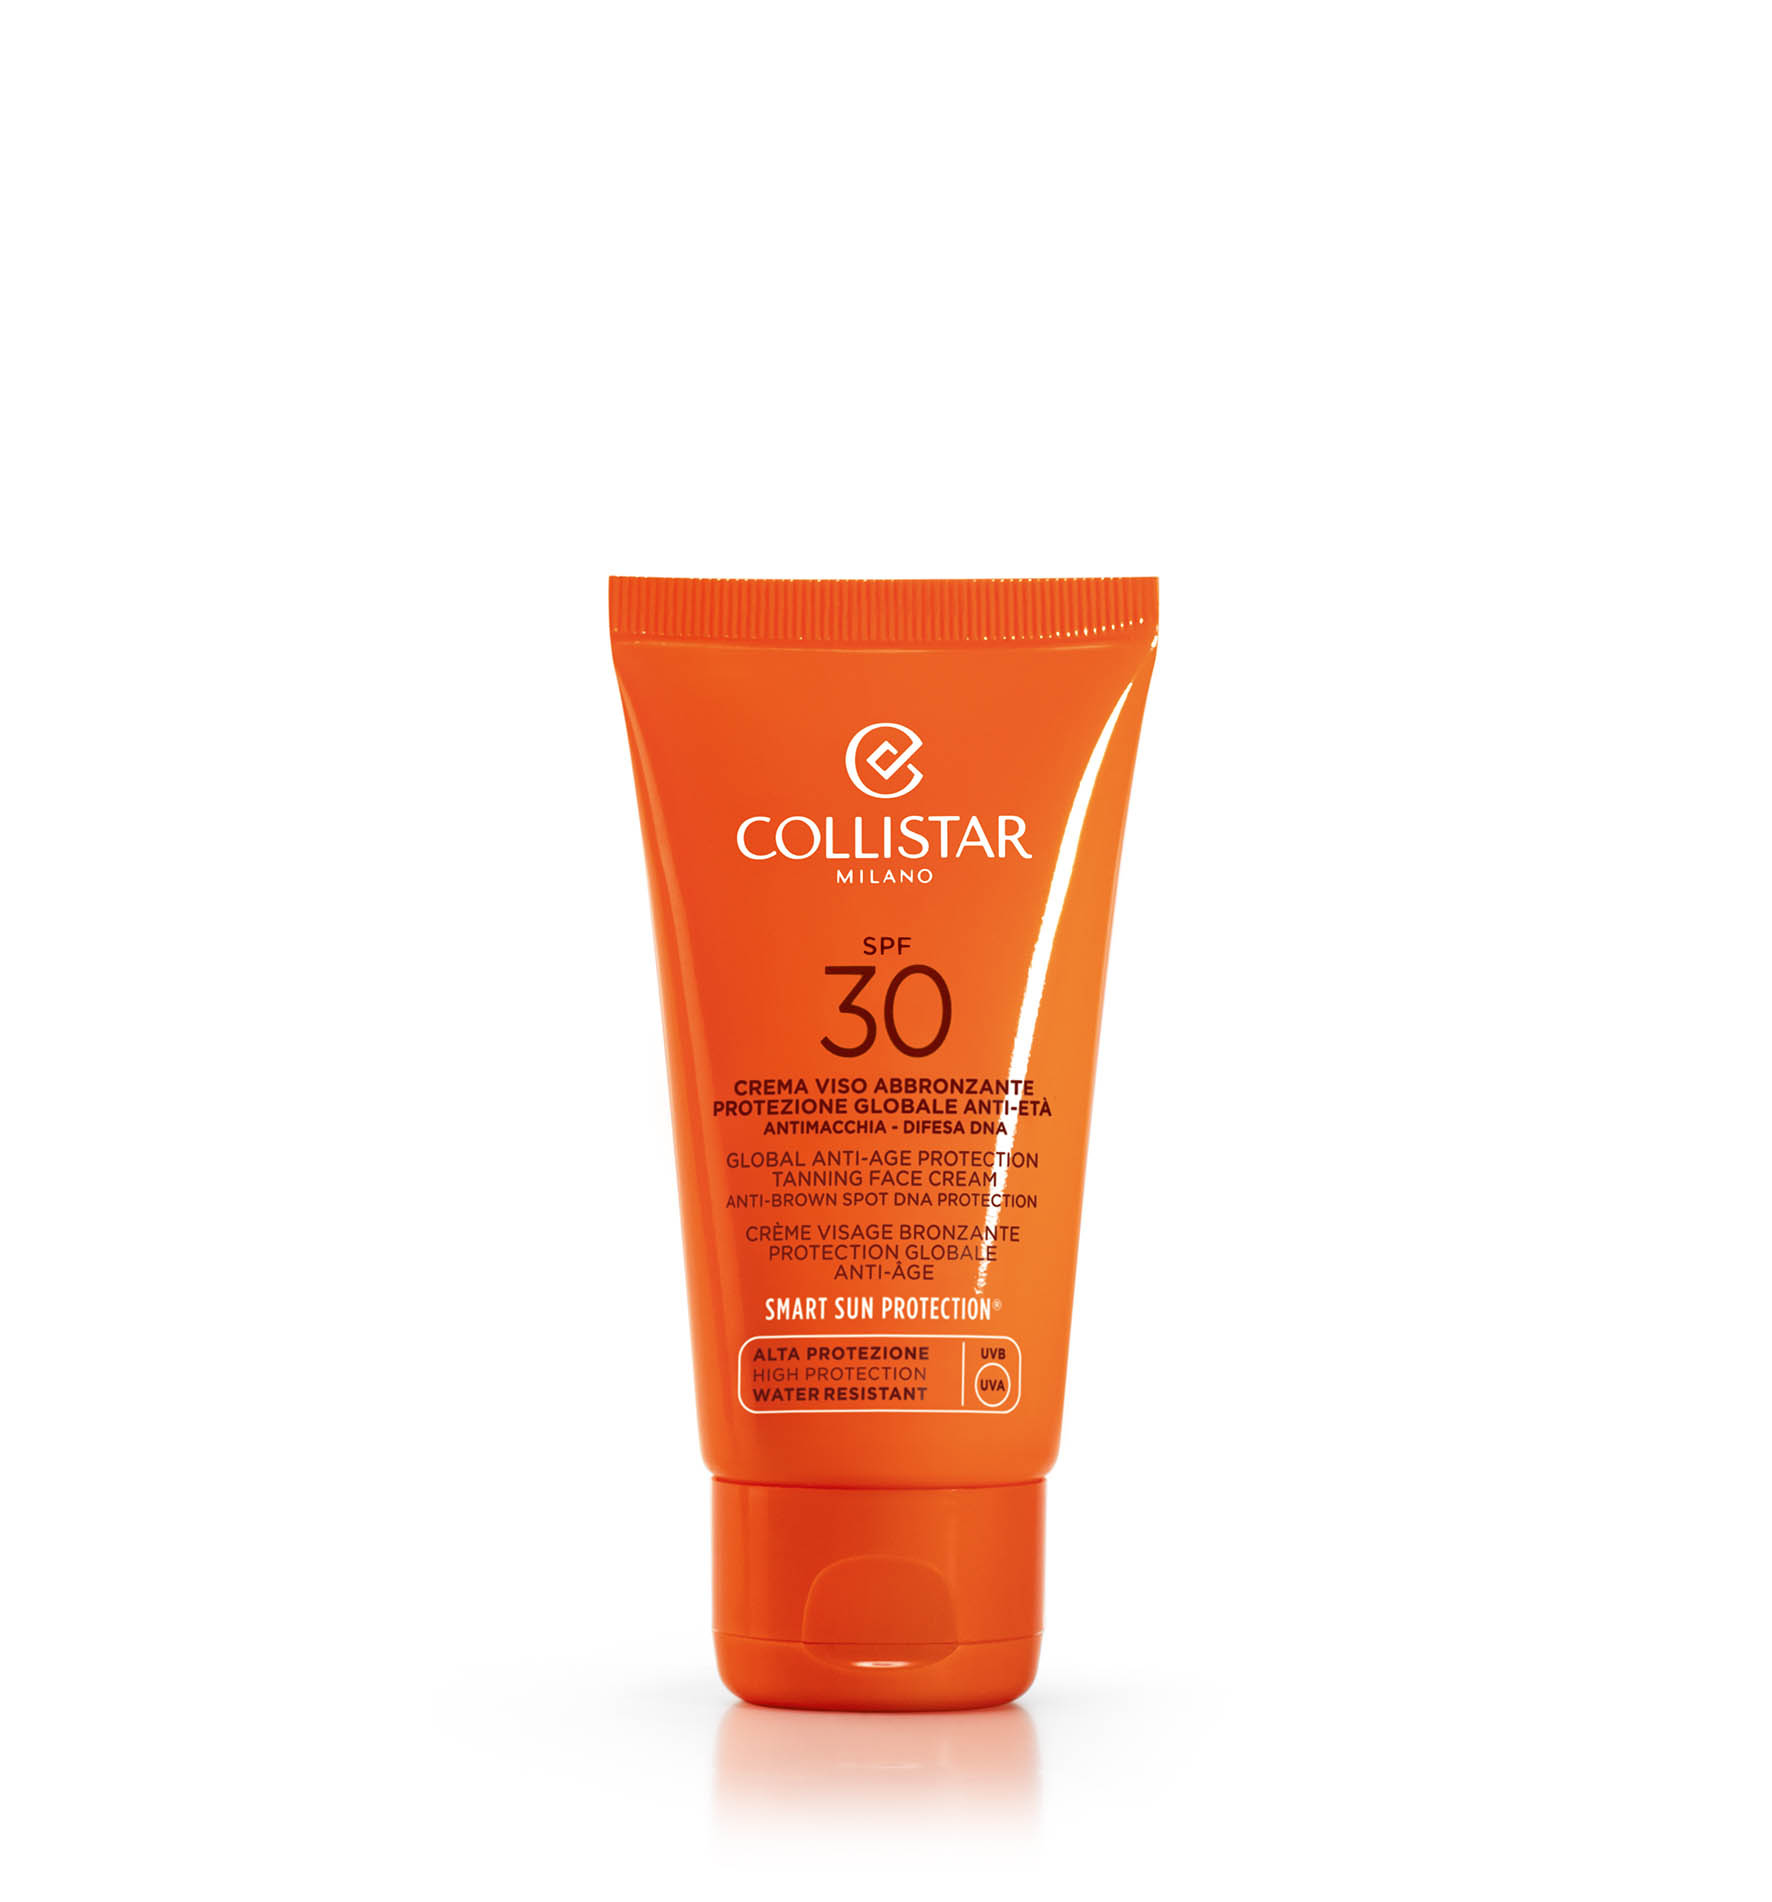 GLOBAL ANTI-AGE PROTECTION TANNING FACE CREAM SPF 30 - Travel Size | Collistar - Shop Online Ufficiale